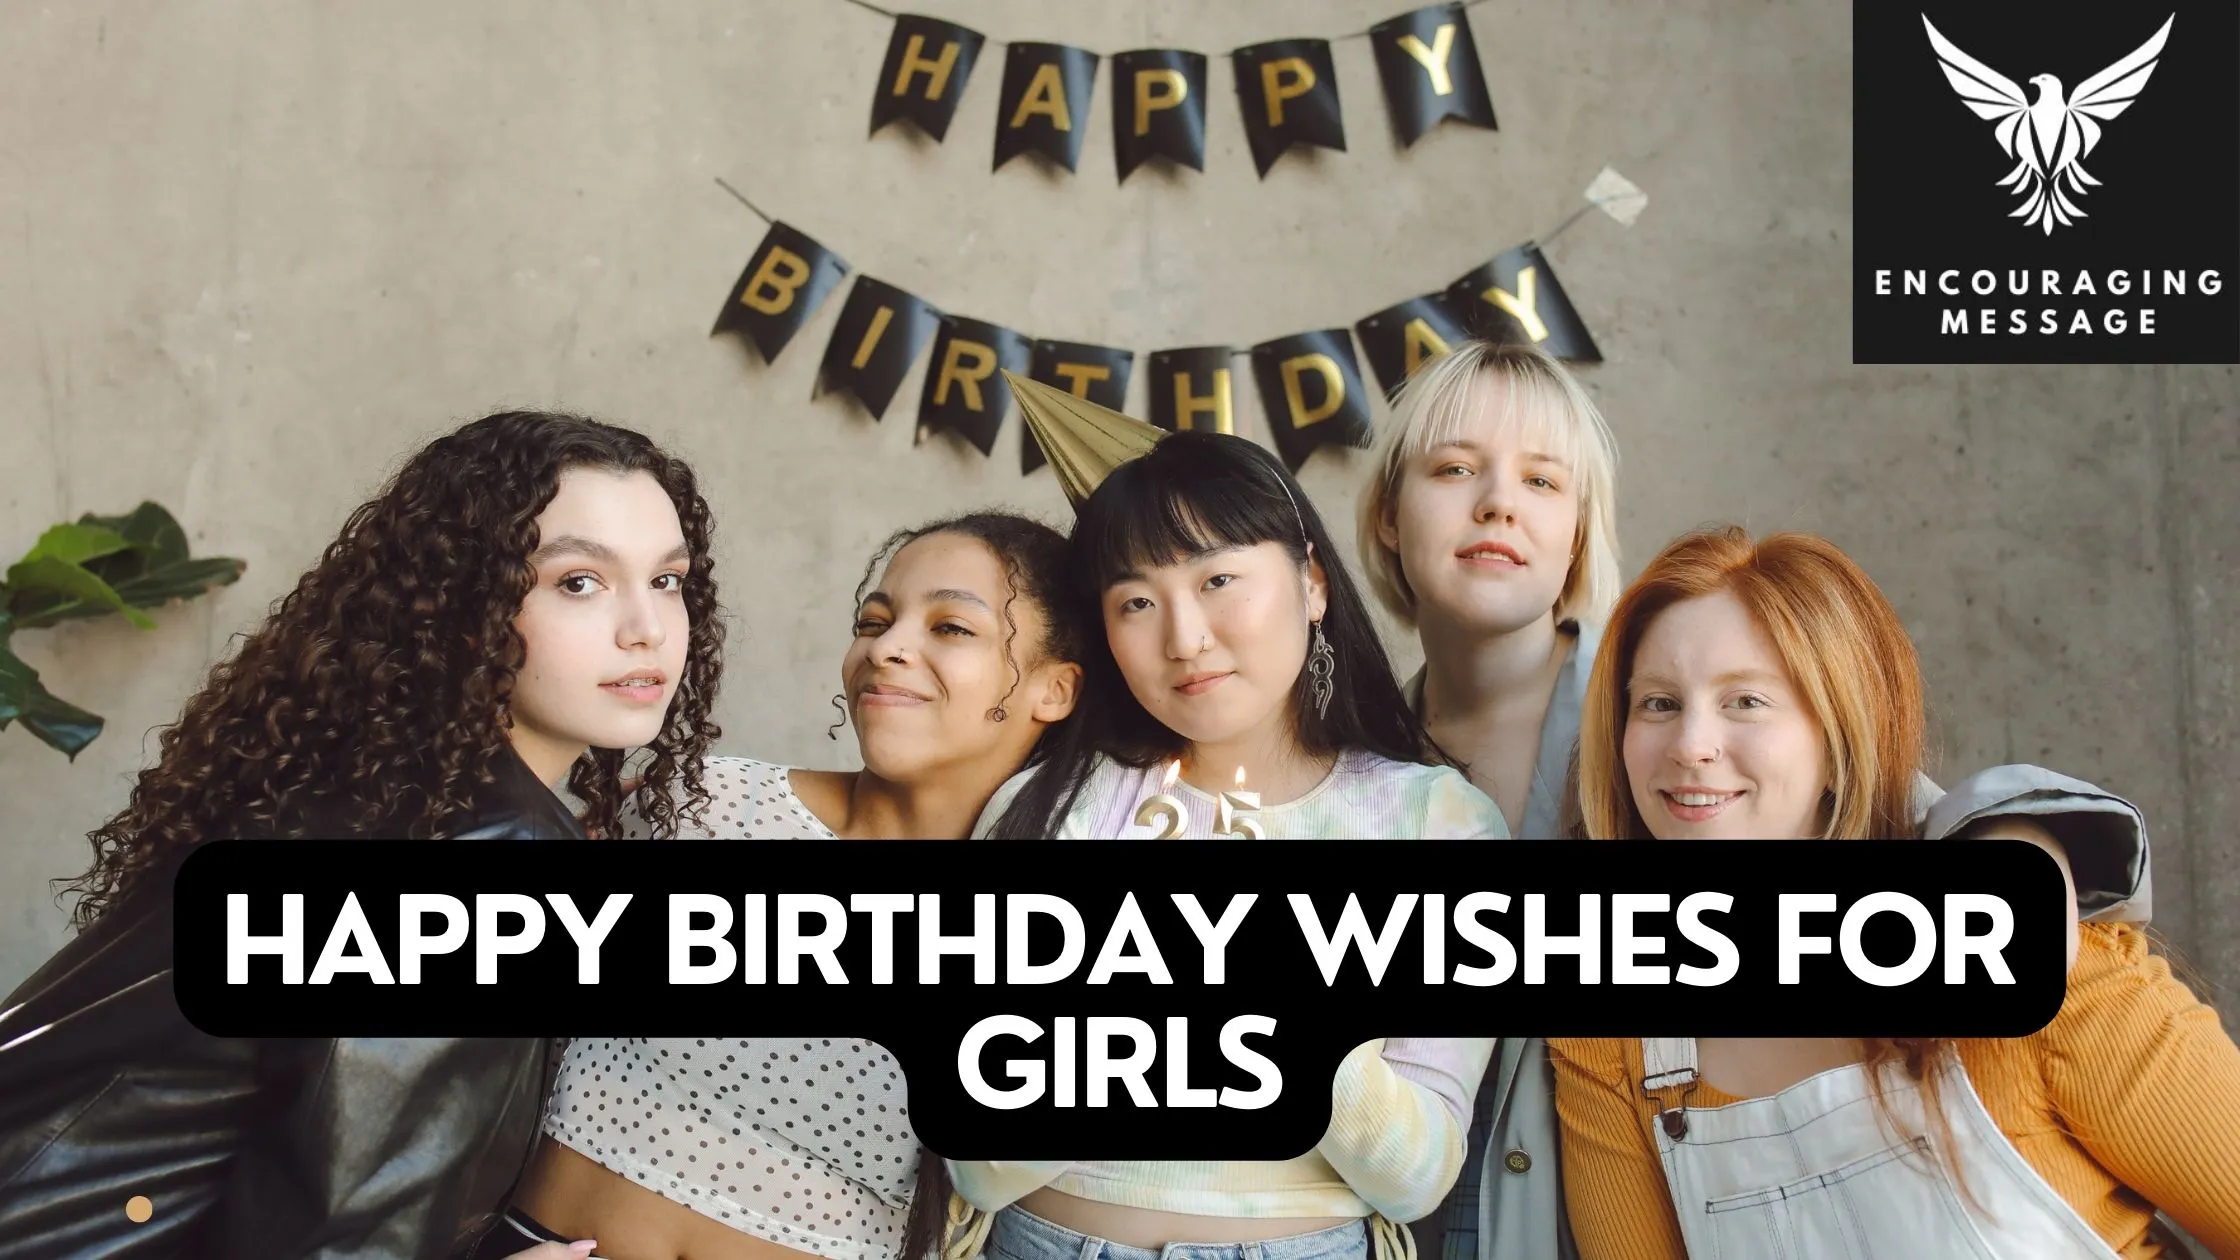 happy birthday wishes for girls to help you express your love, appreciation, and best wishes on her special day